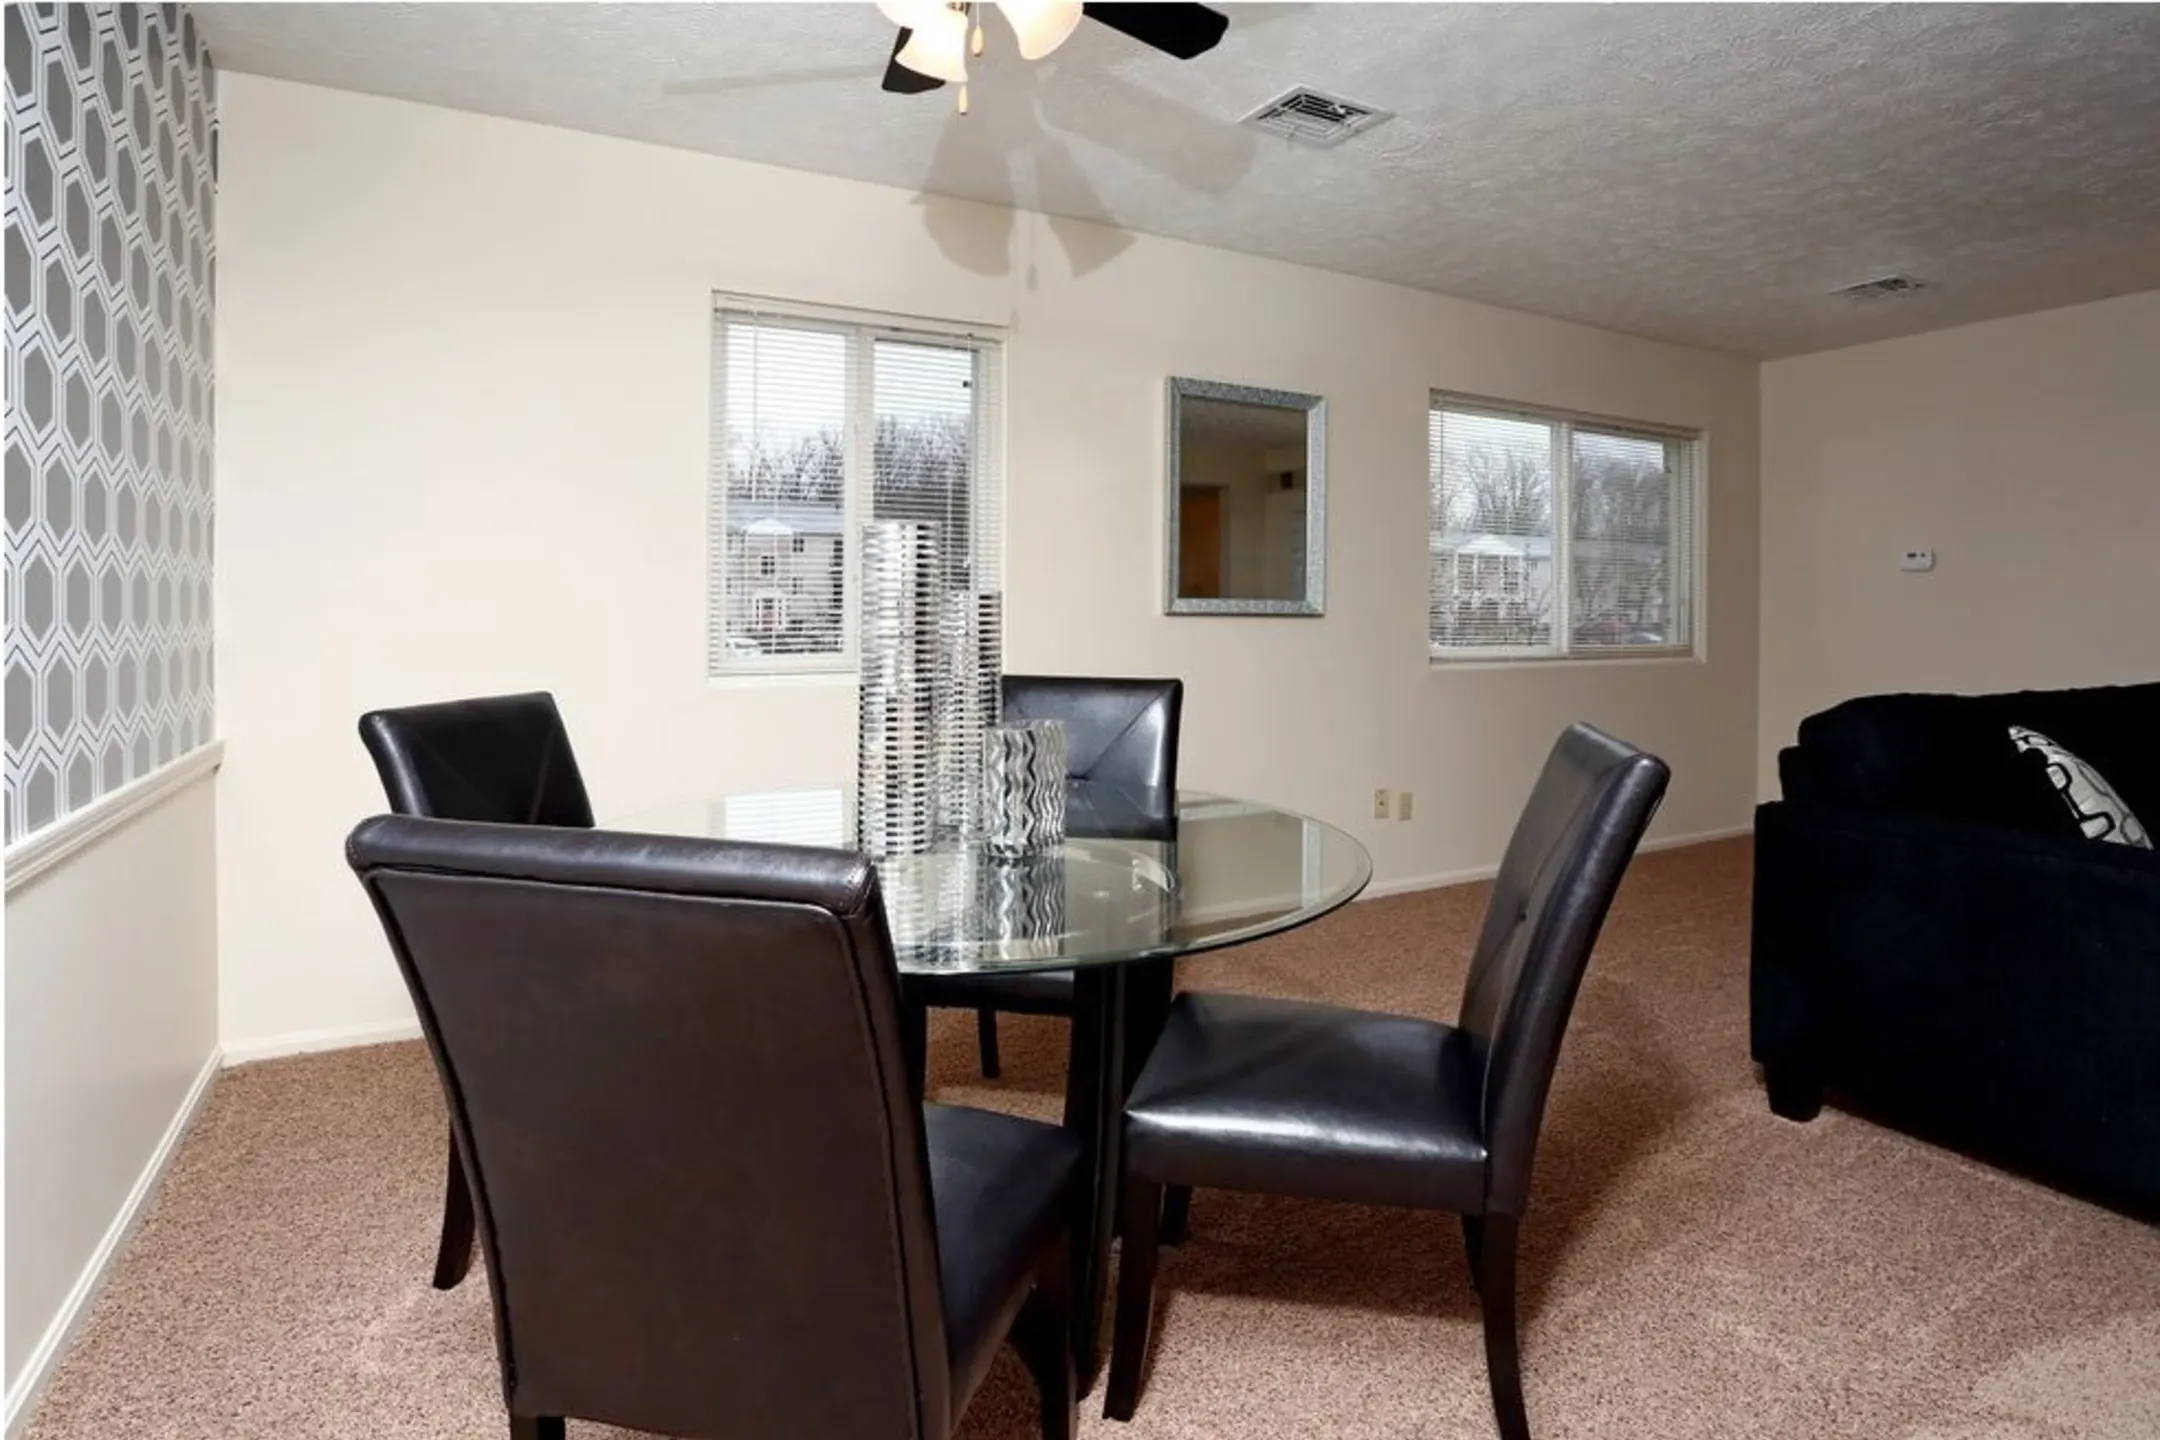 Dining Room - Mill Creek Village - Youngstown, OH